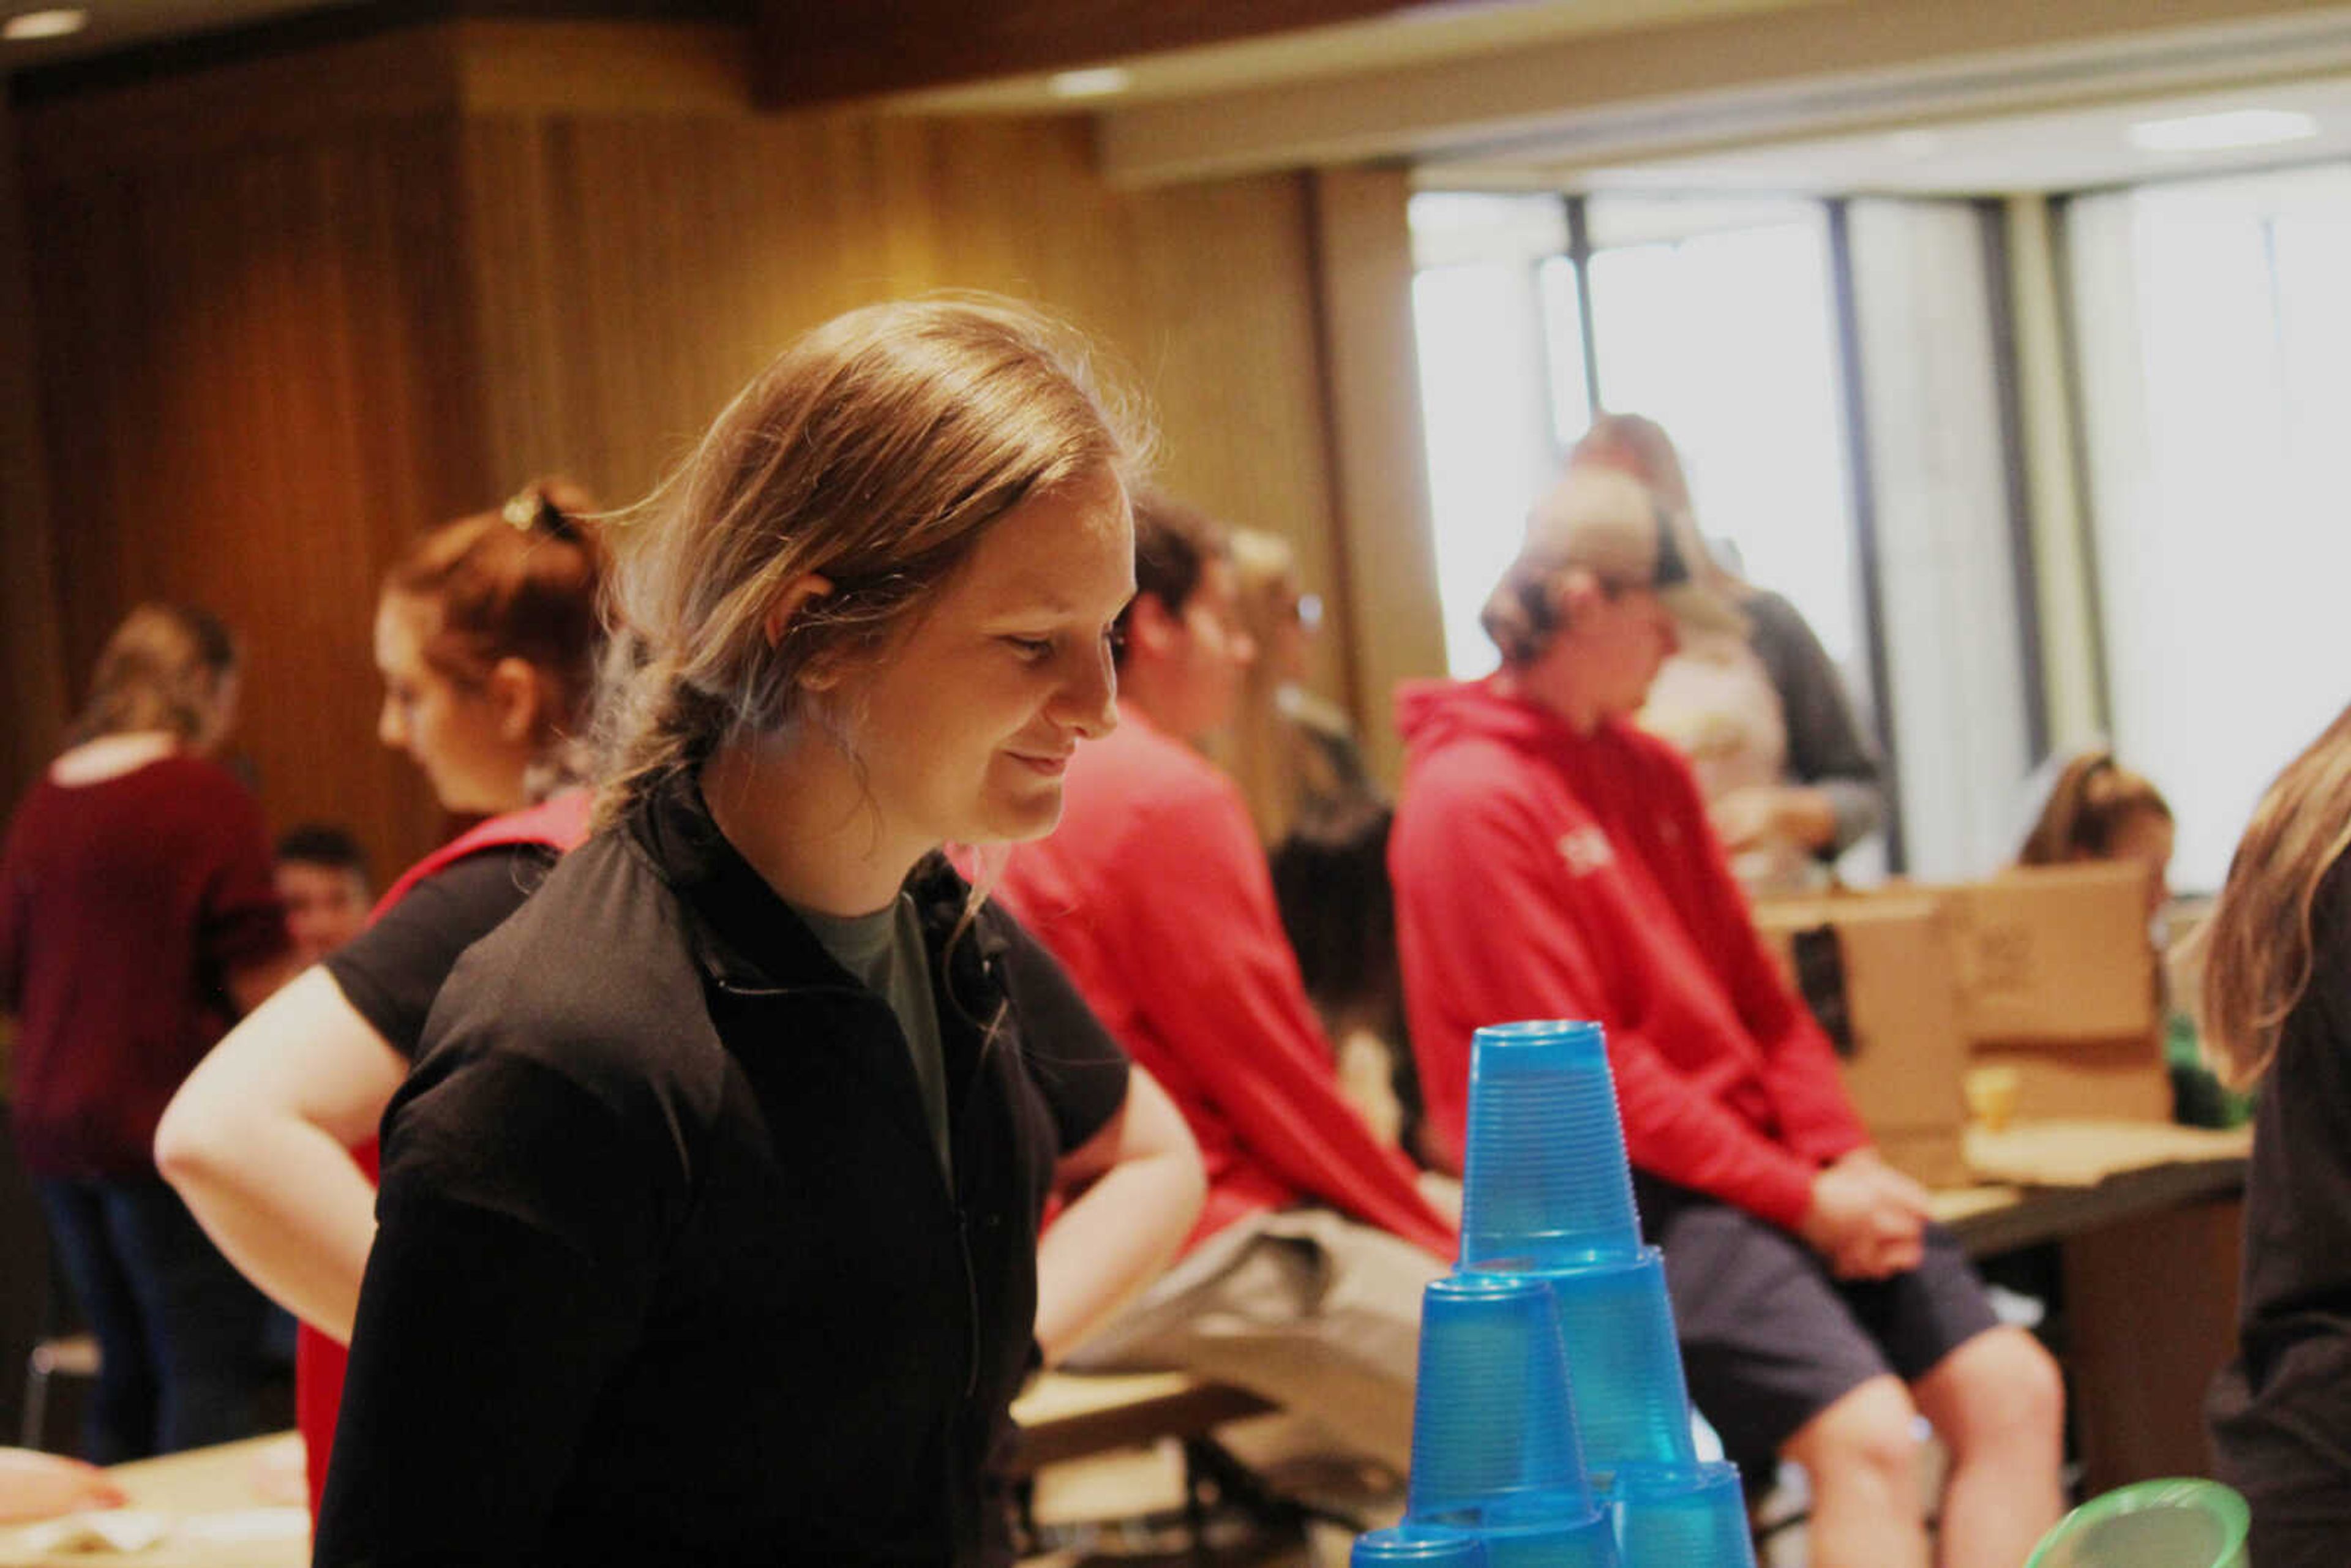 Johanna Franke watches as her little sister test her own skills in the cup stacking game.